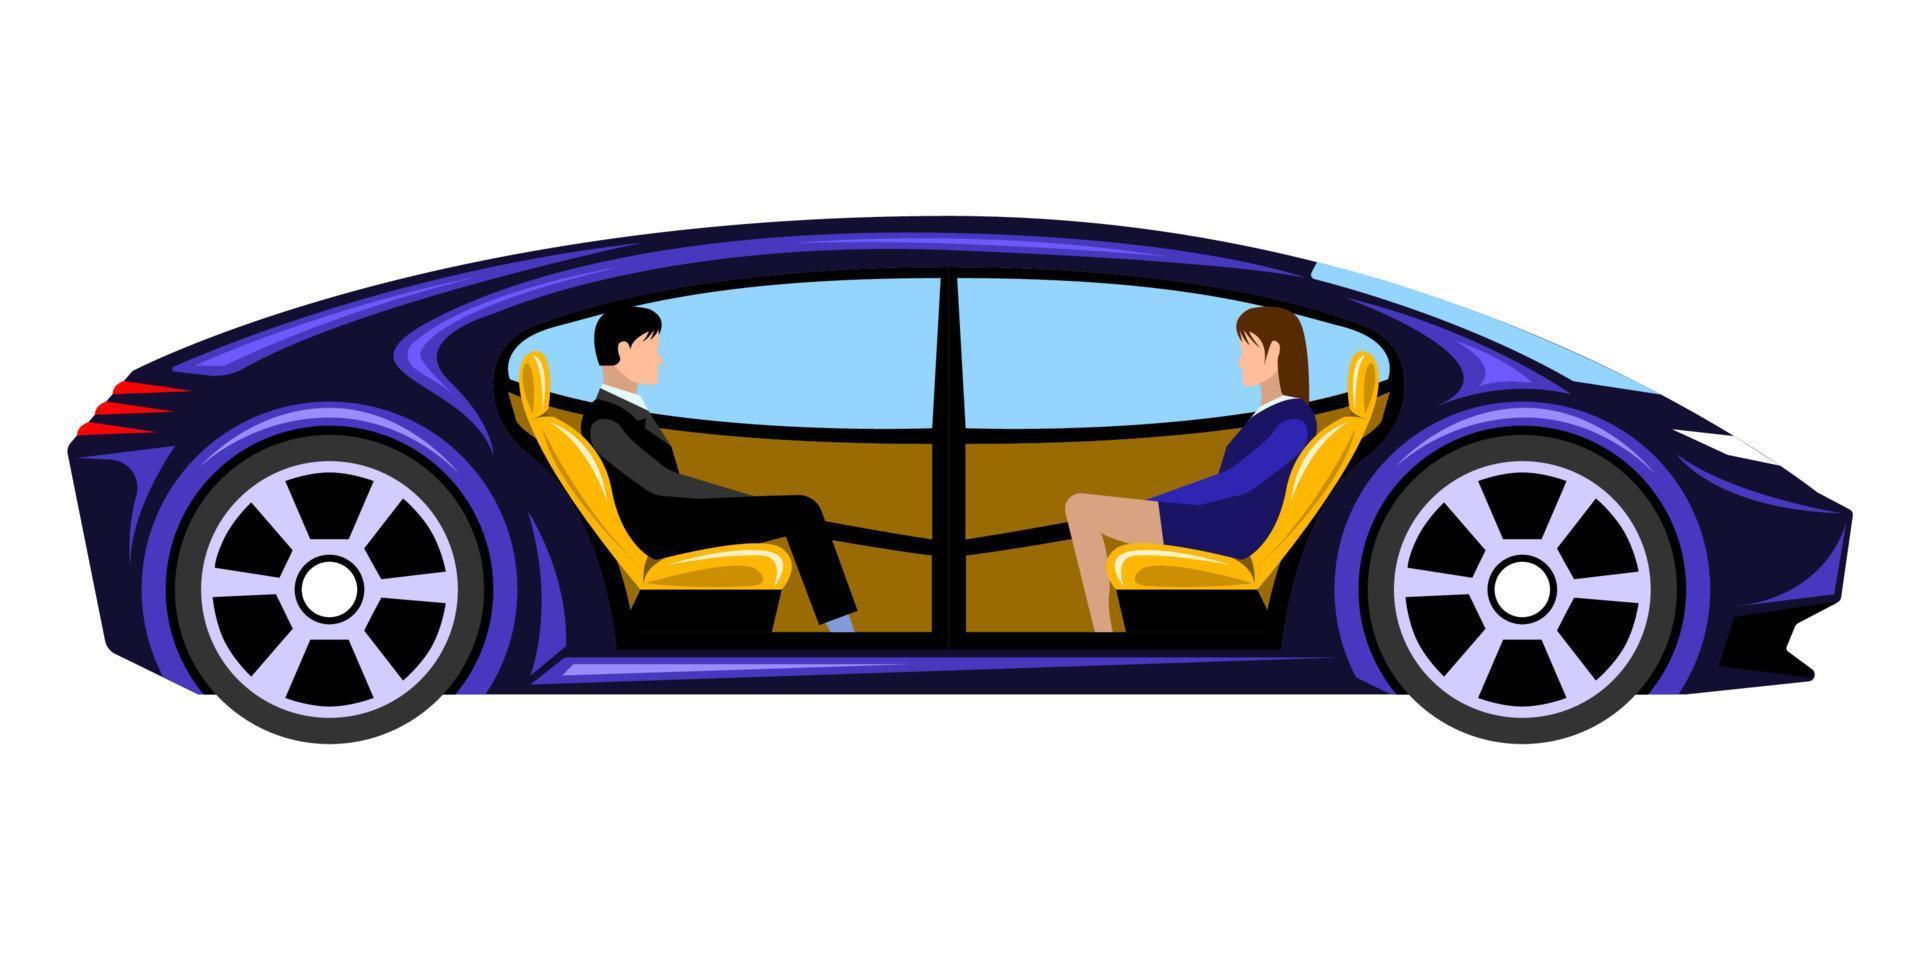 Autonomous vehicle self driving car cartoon isolated white background vector